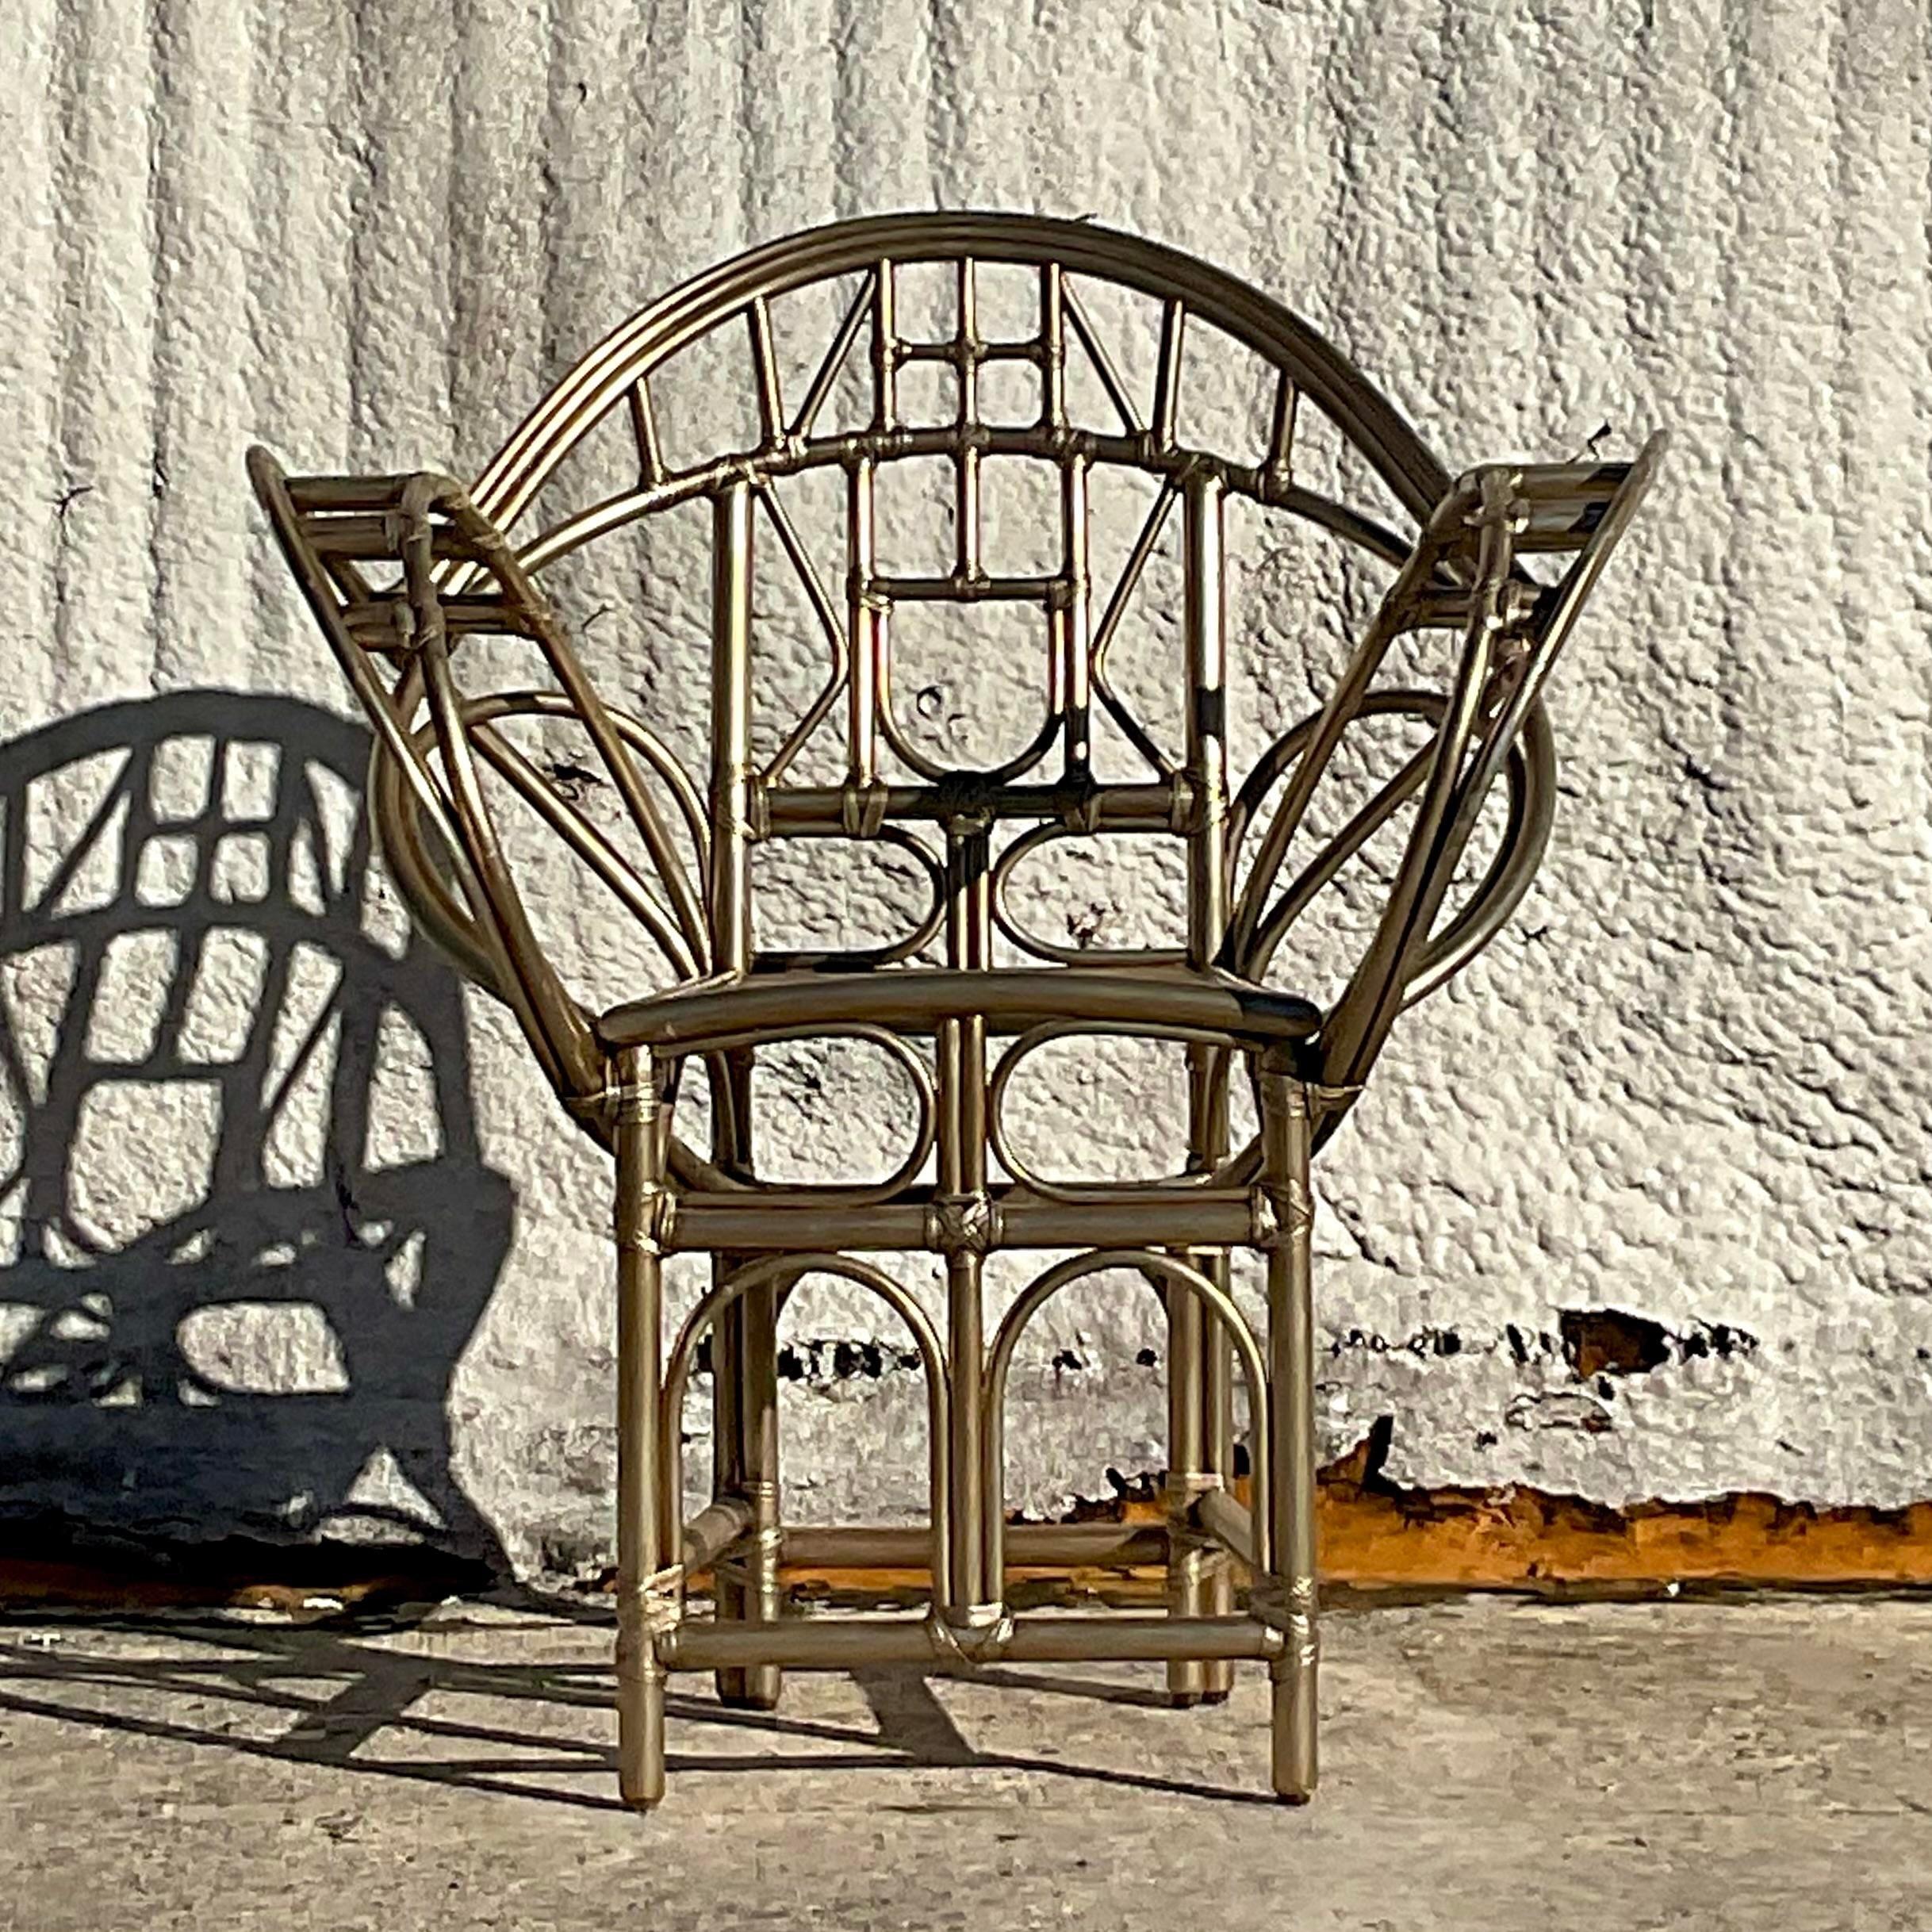 A fabulous vintage Coastal Peacock chair. Made by the iconic McGuire group and tagged below. In the original gold finish. Acquired from a Palm Beach estate